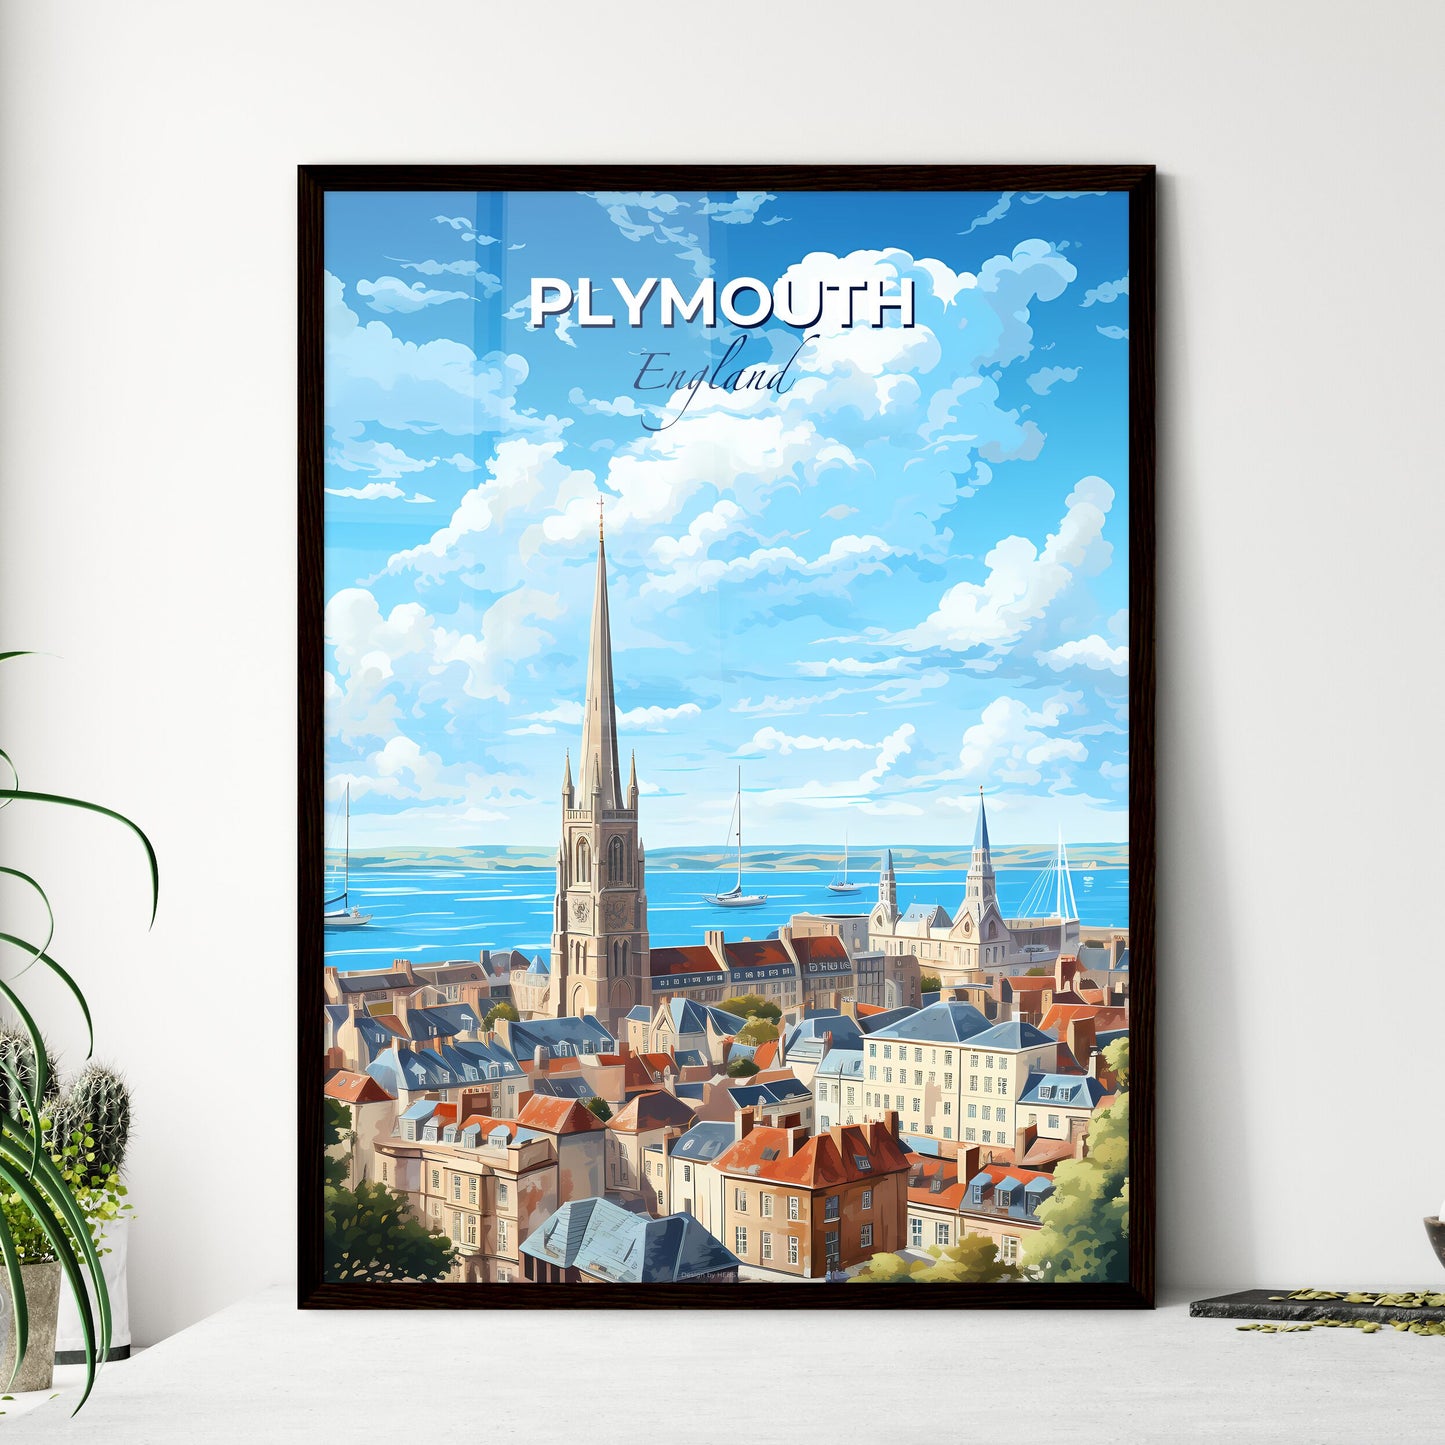 Plymouth England Skyline - A City With A Tall Tower And Many Buildings And Boats In The Water - Customizable Travel Gift Default Title